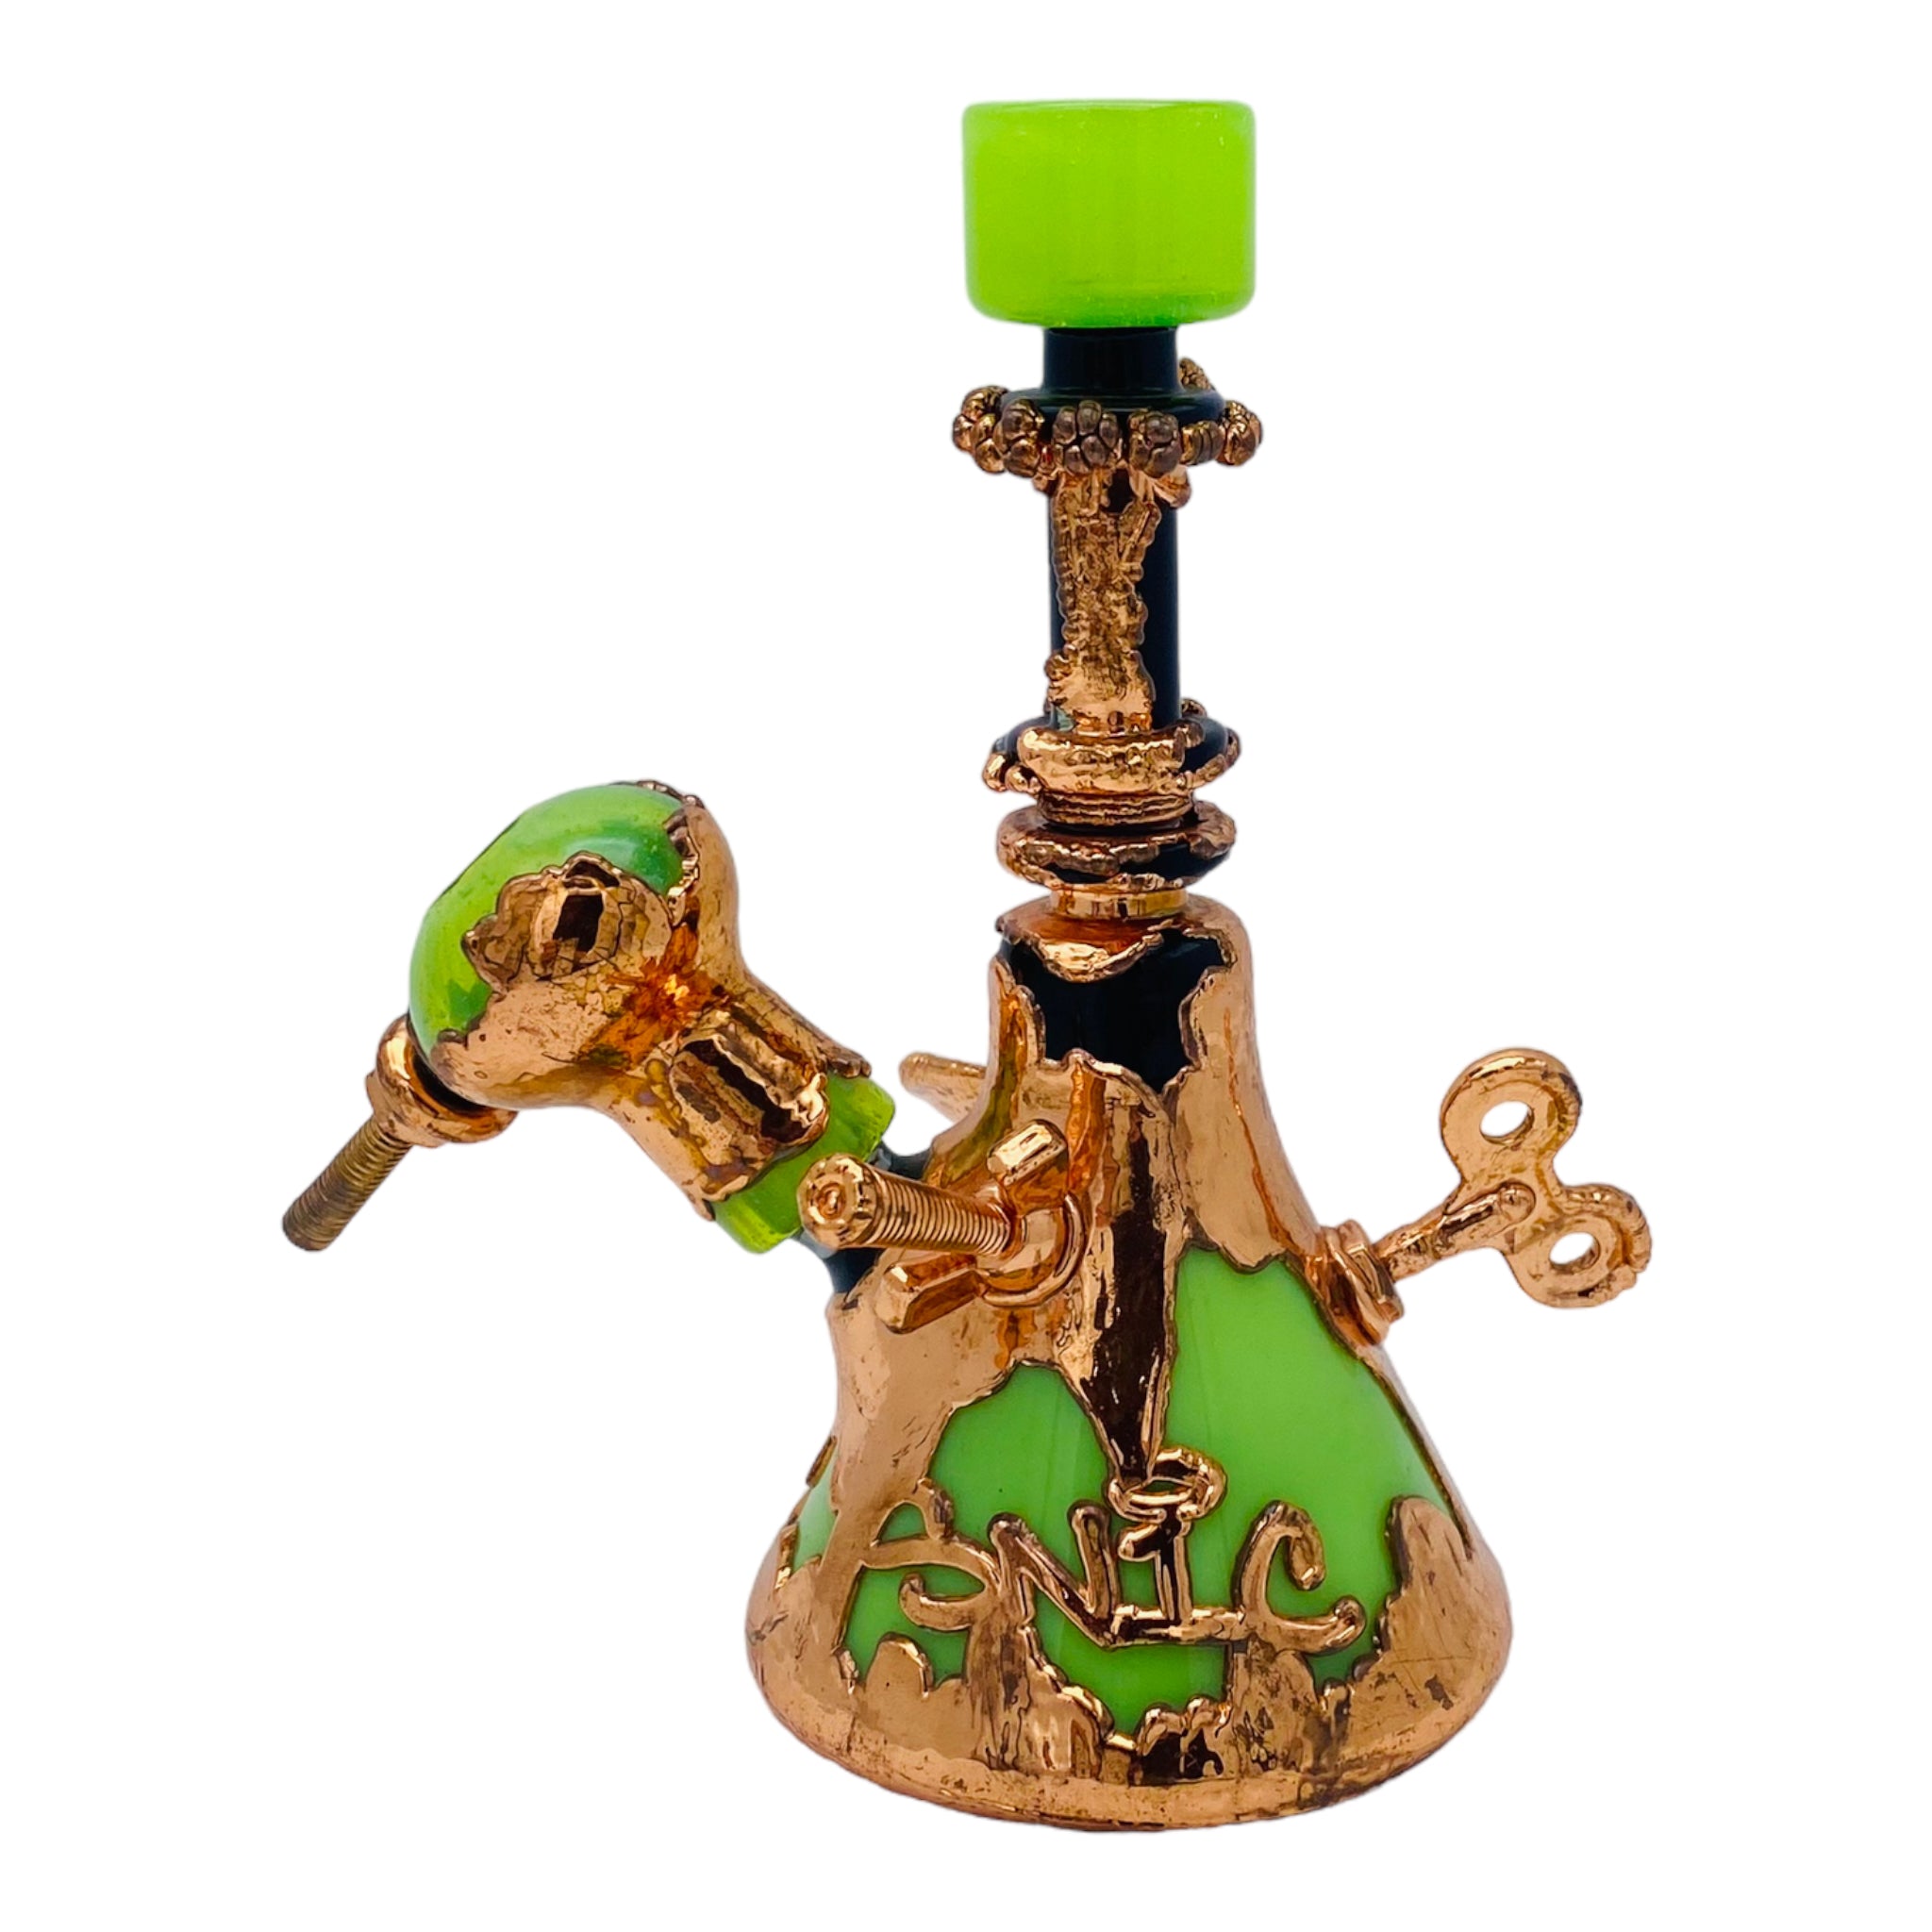 SNIC Glass - Copper Electroformed Glass Dab Rig With Steampunk Theme